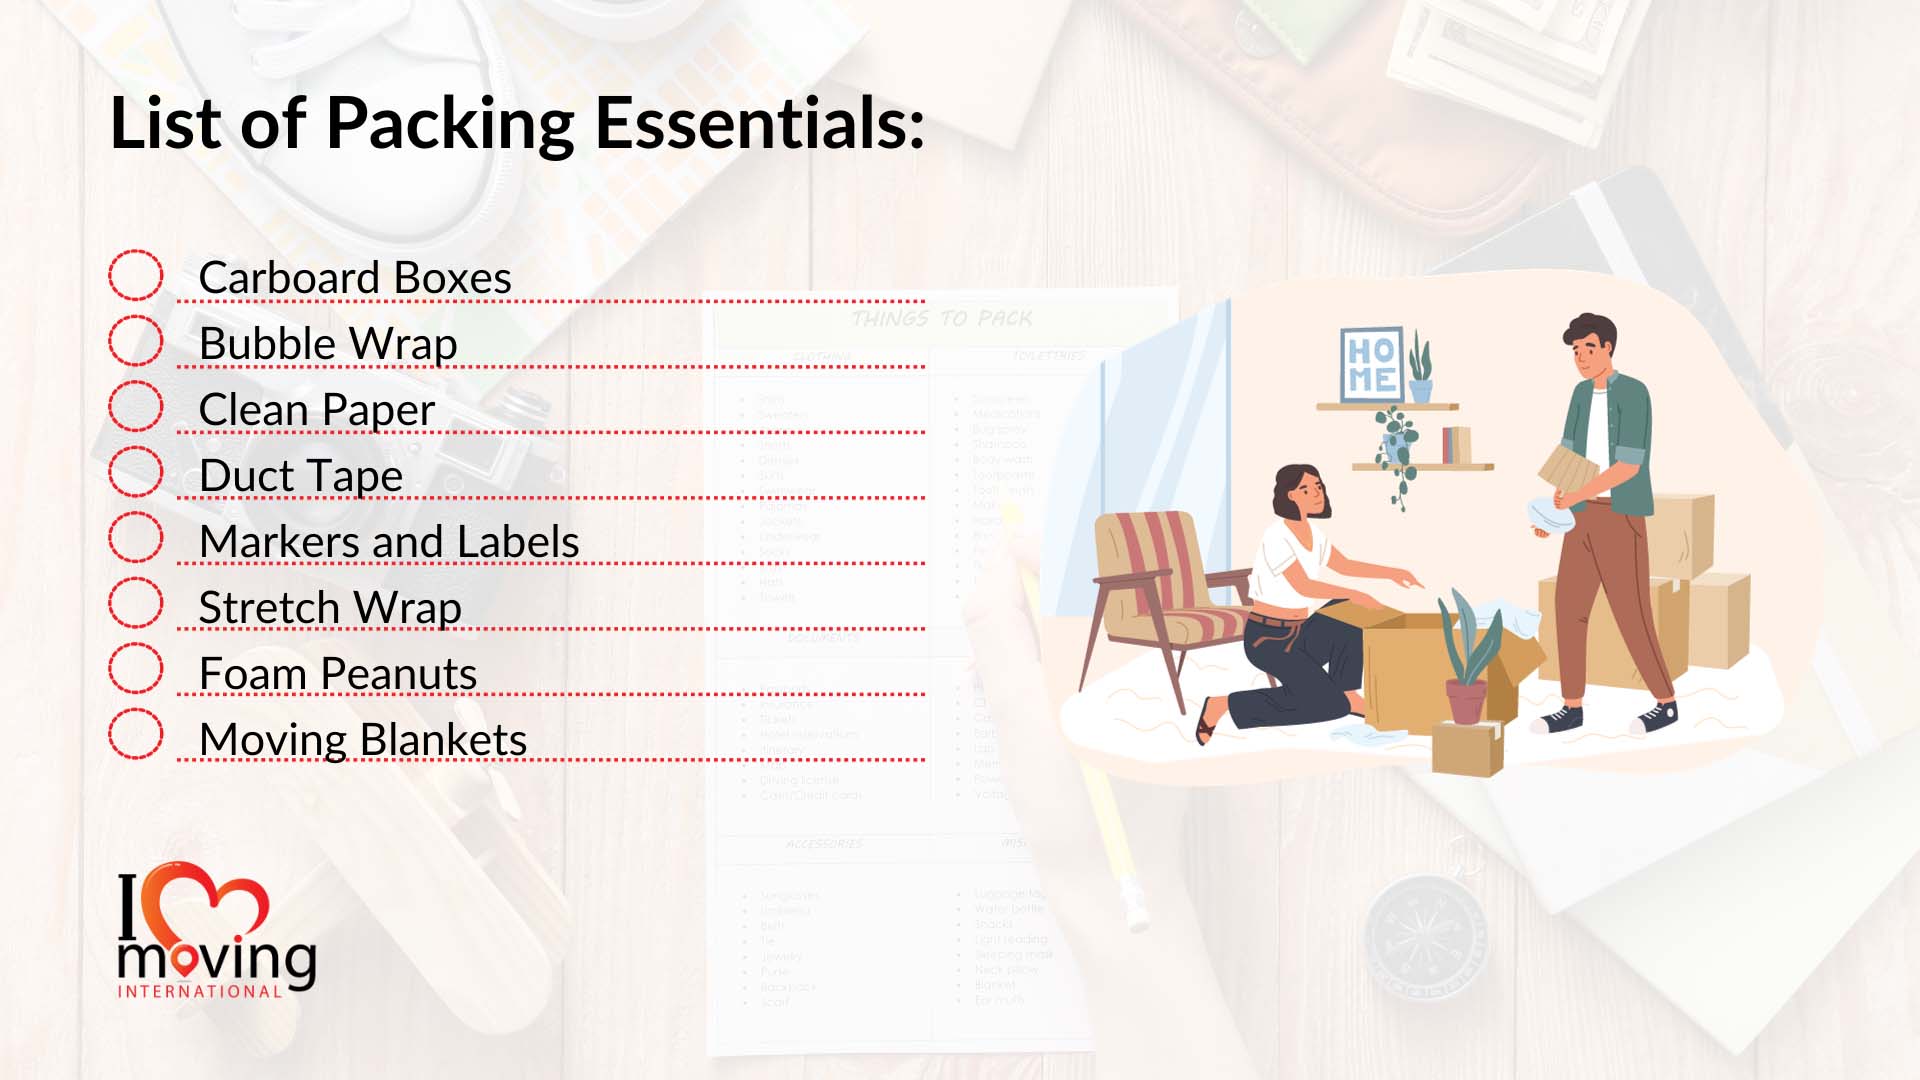 Printable List of Packing Essentials